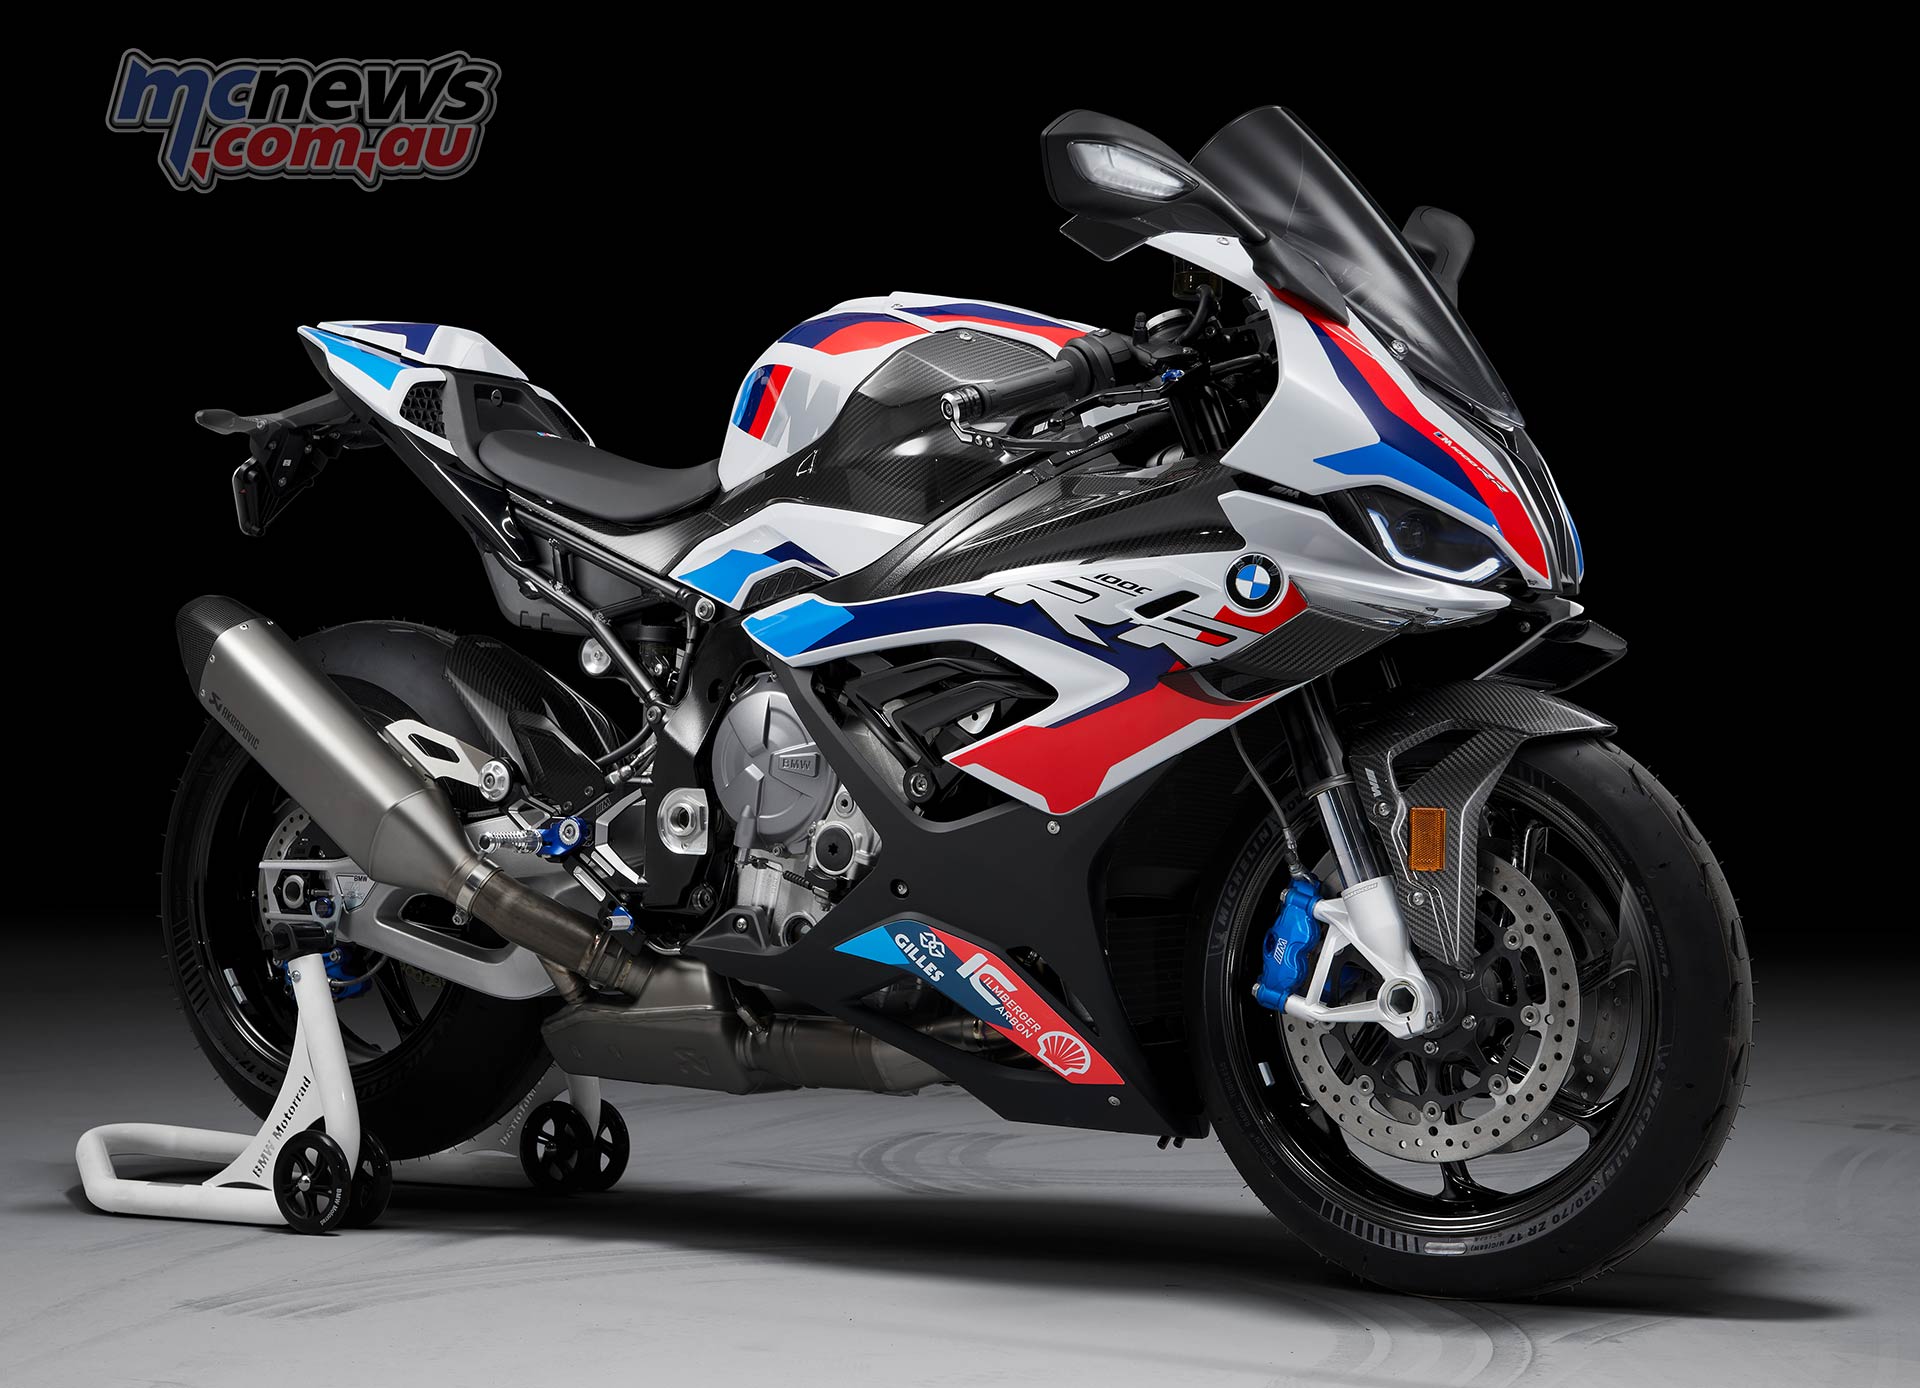 More BMW M 1000 RR motorcycles on the WSBK grid in 2021 | MCNews